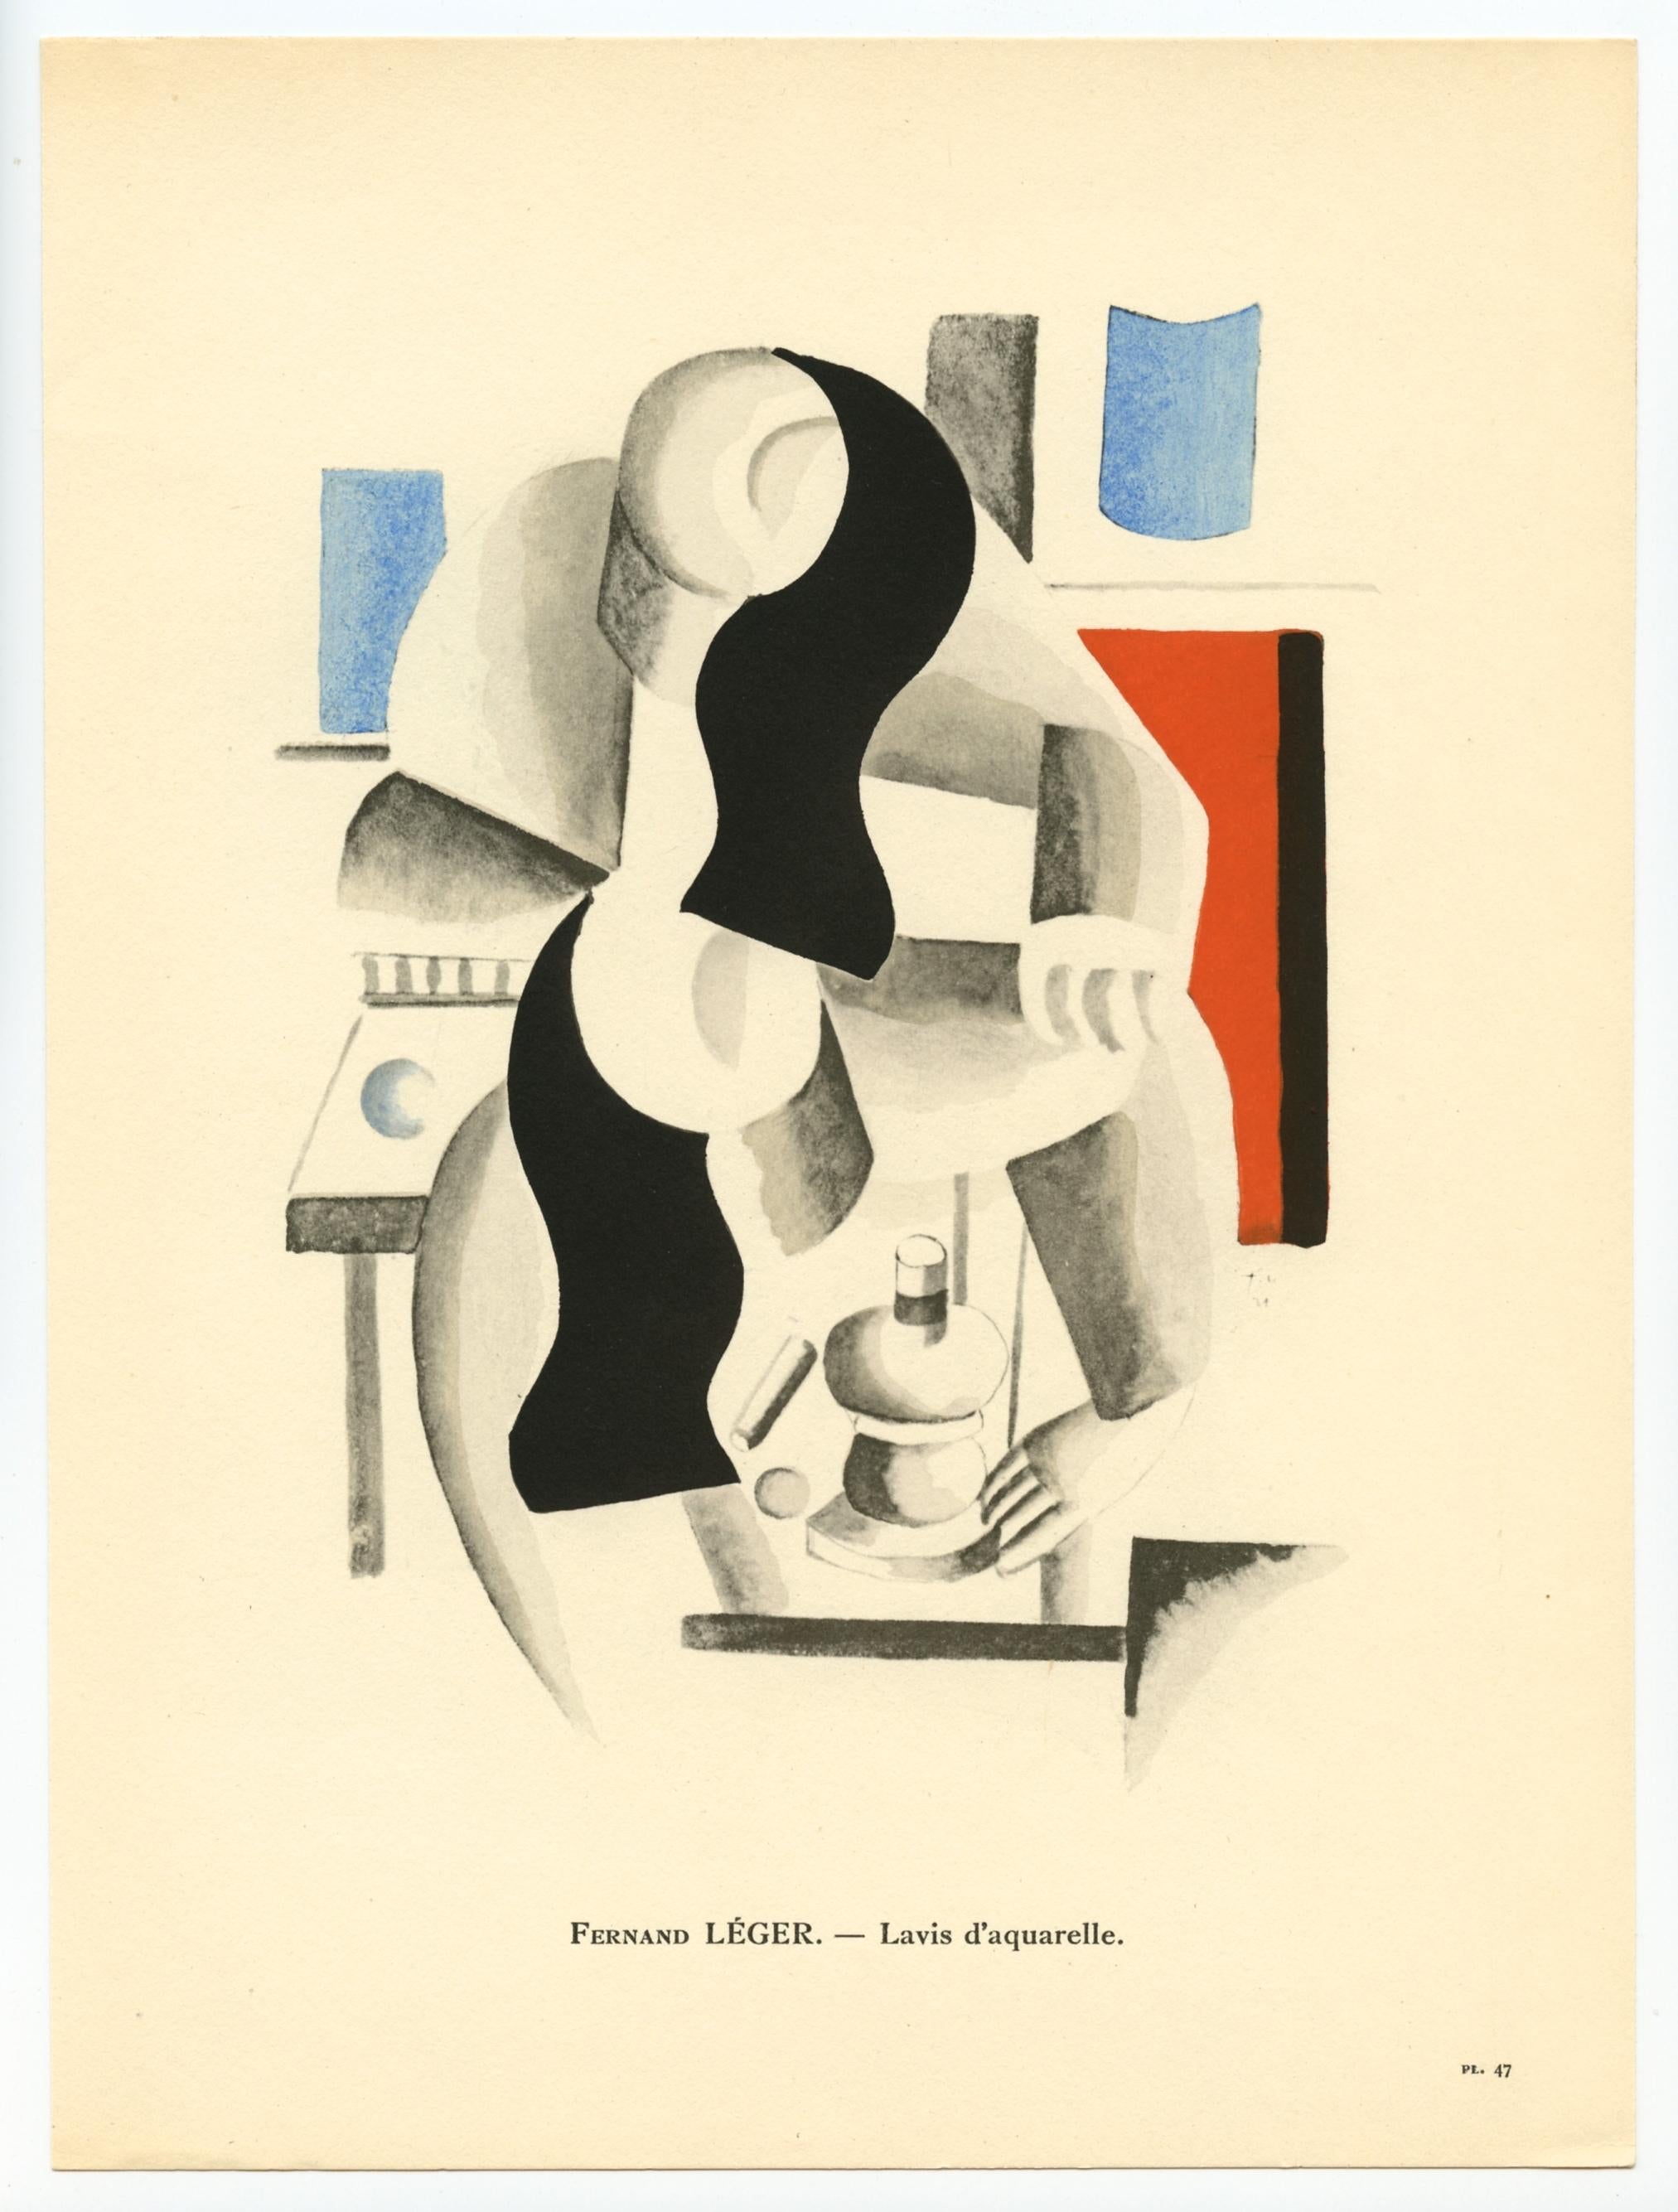 Medium: pochoir (after the watercolor). Printed in Paris in 1929 at the atelier of Daniel Jacomet for L'Art Cubiste. Image size: 7 1/2 x 5 1/2 inches (190 x 145 mm). There is an inscription with the artist's name printed in text beneath the image.